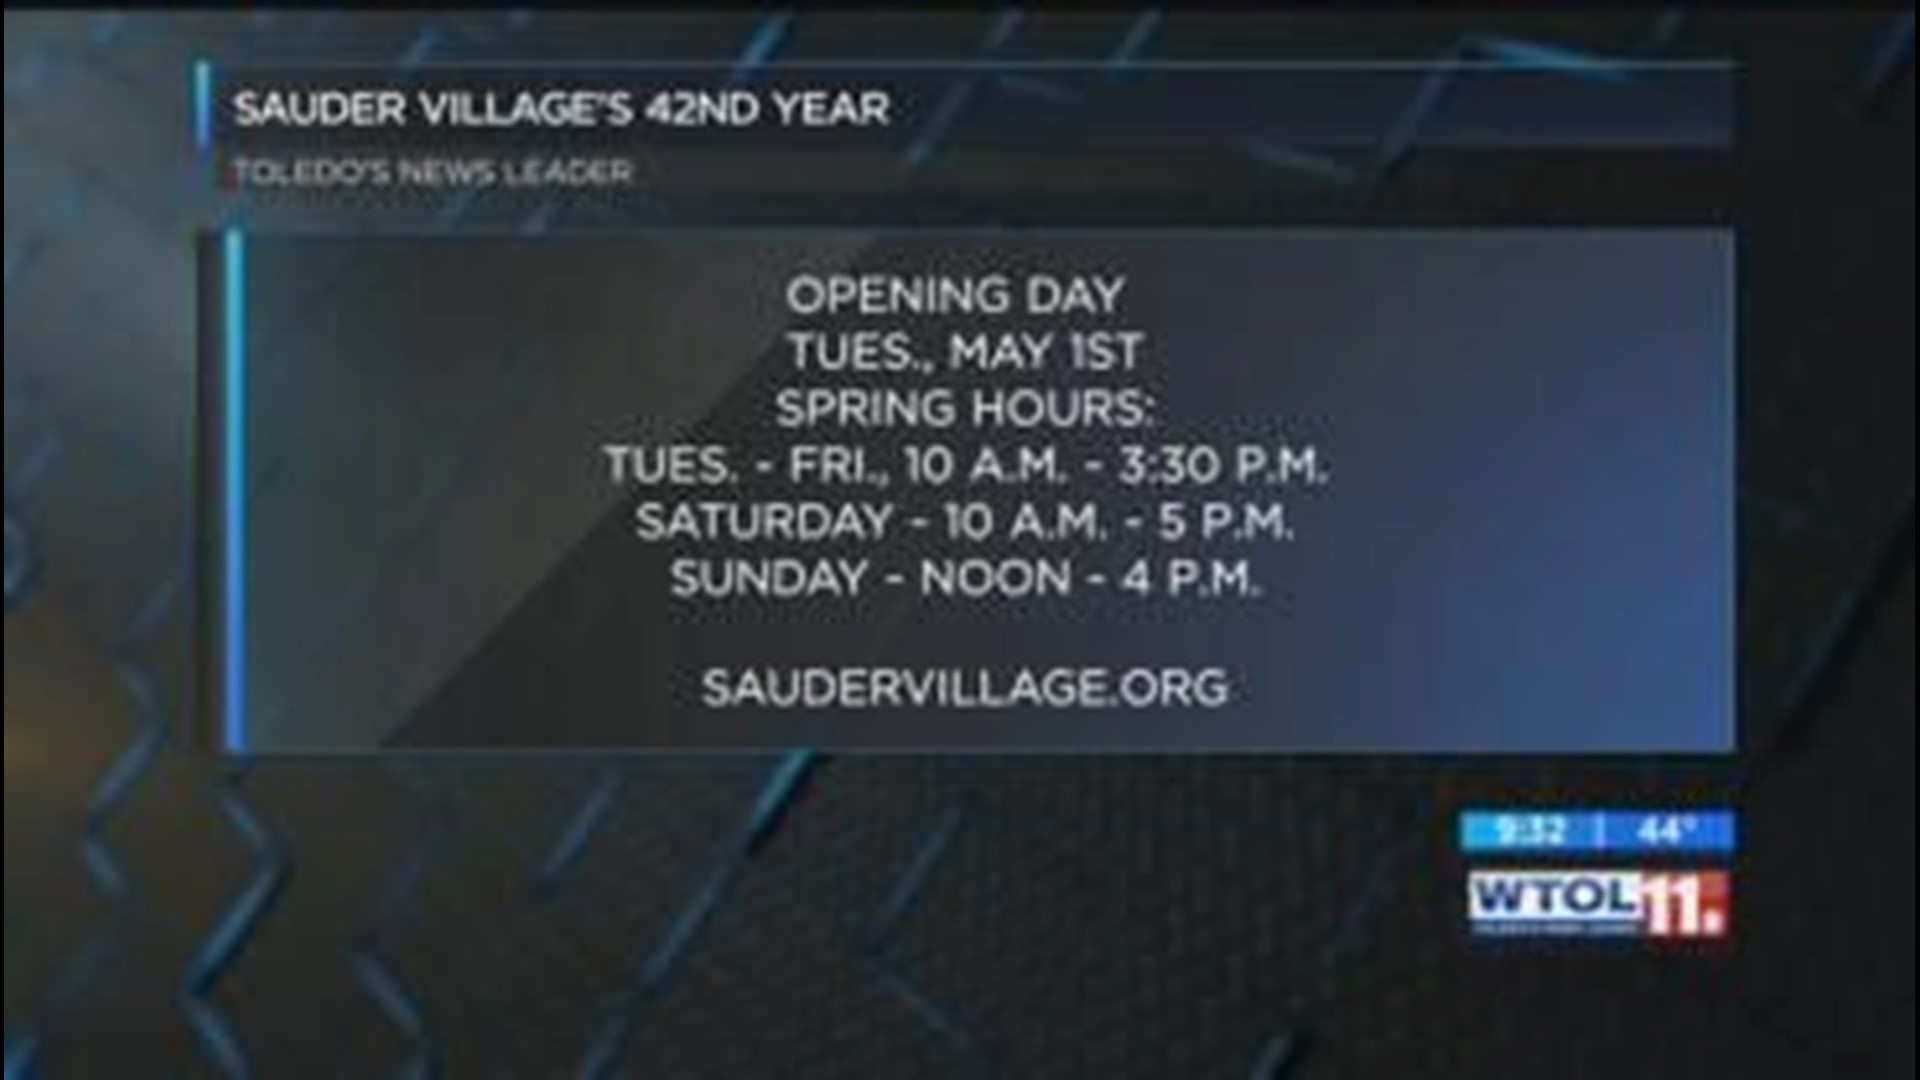 You're invited to Sauder Village's opening day